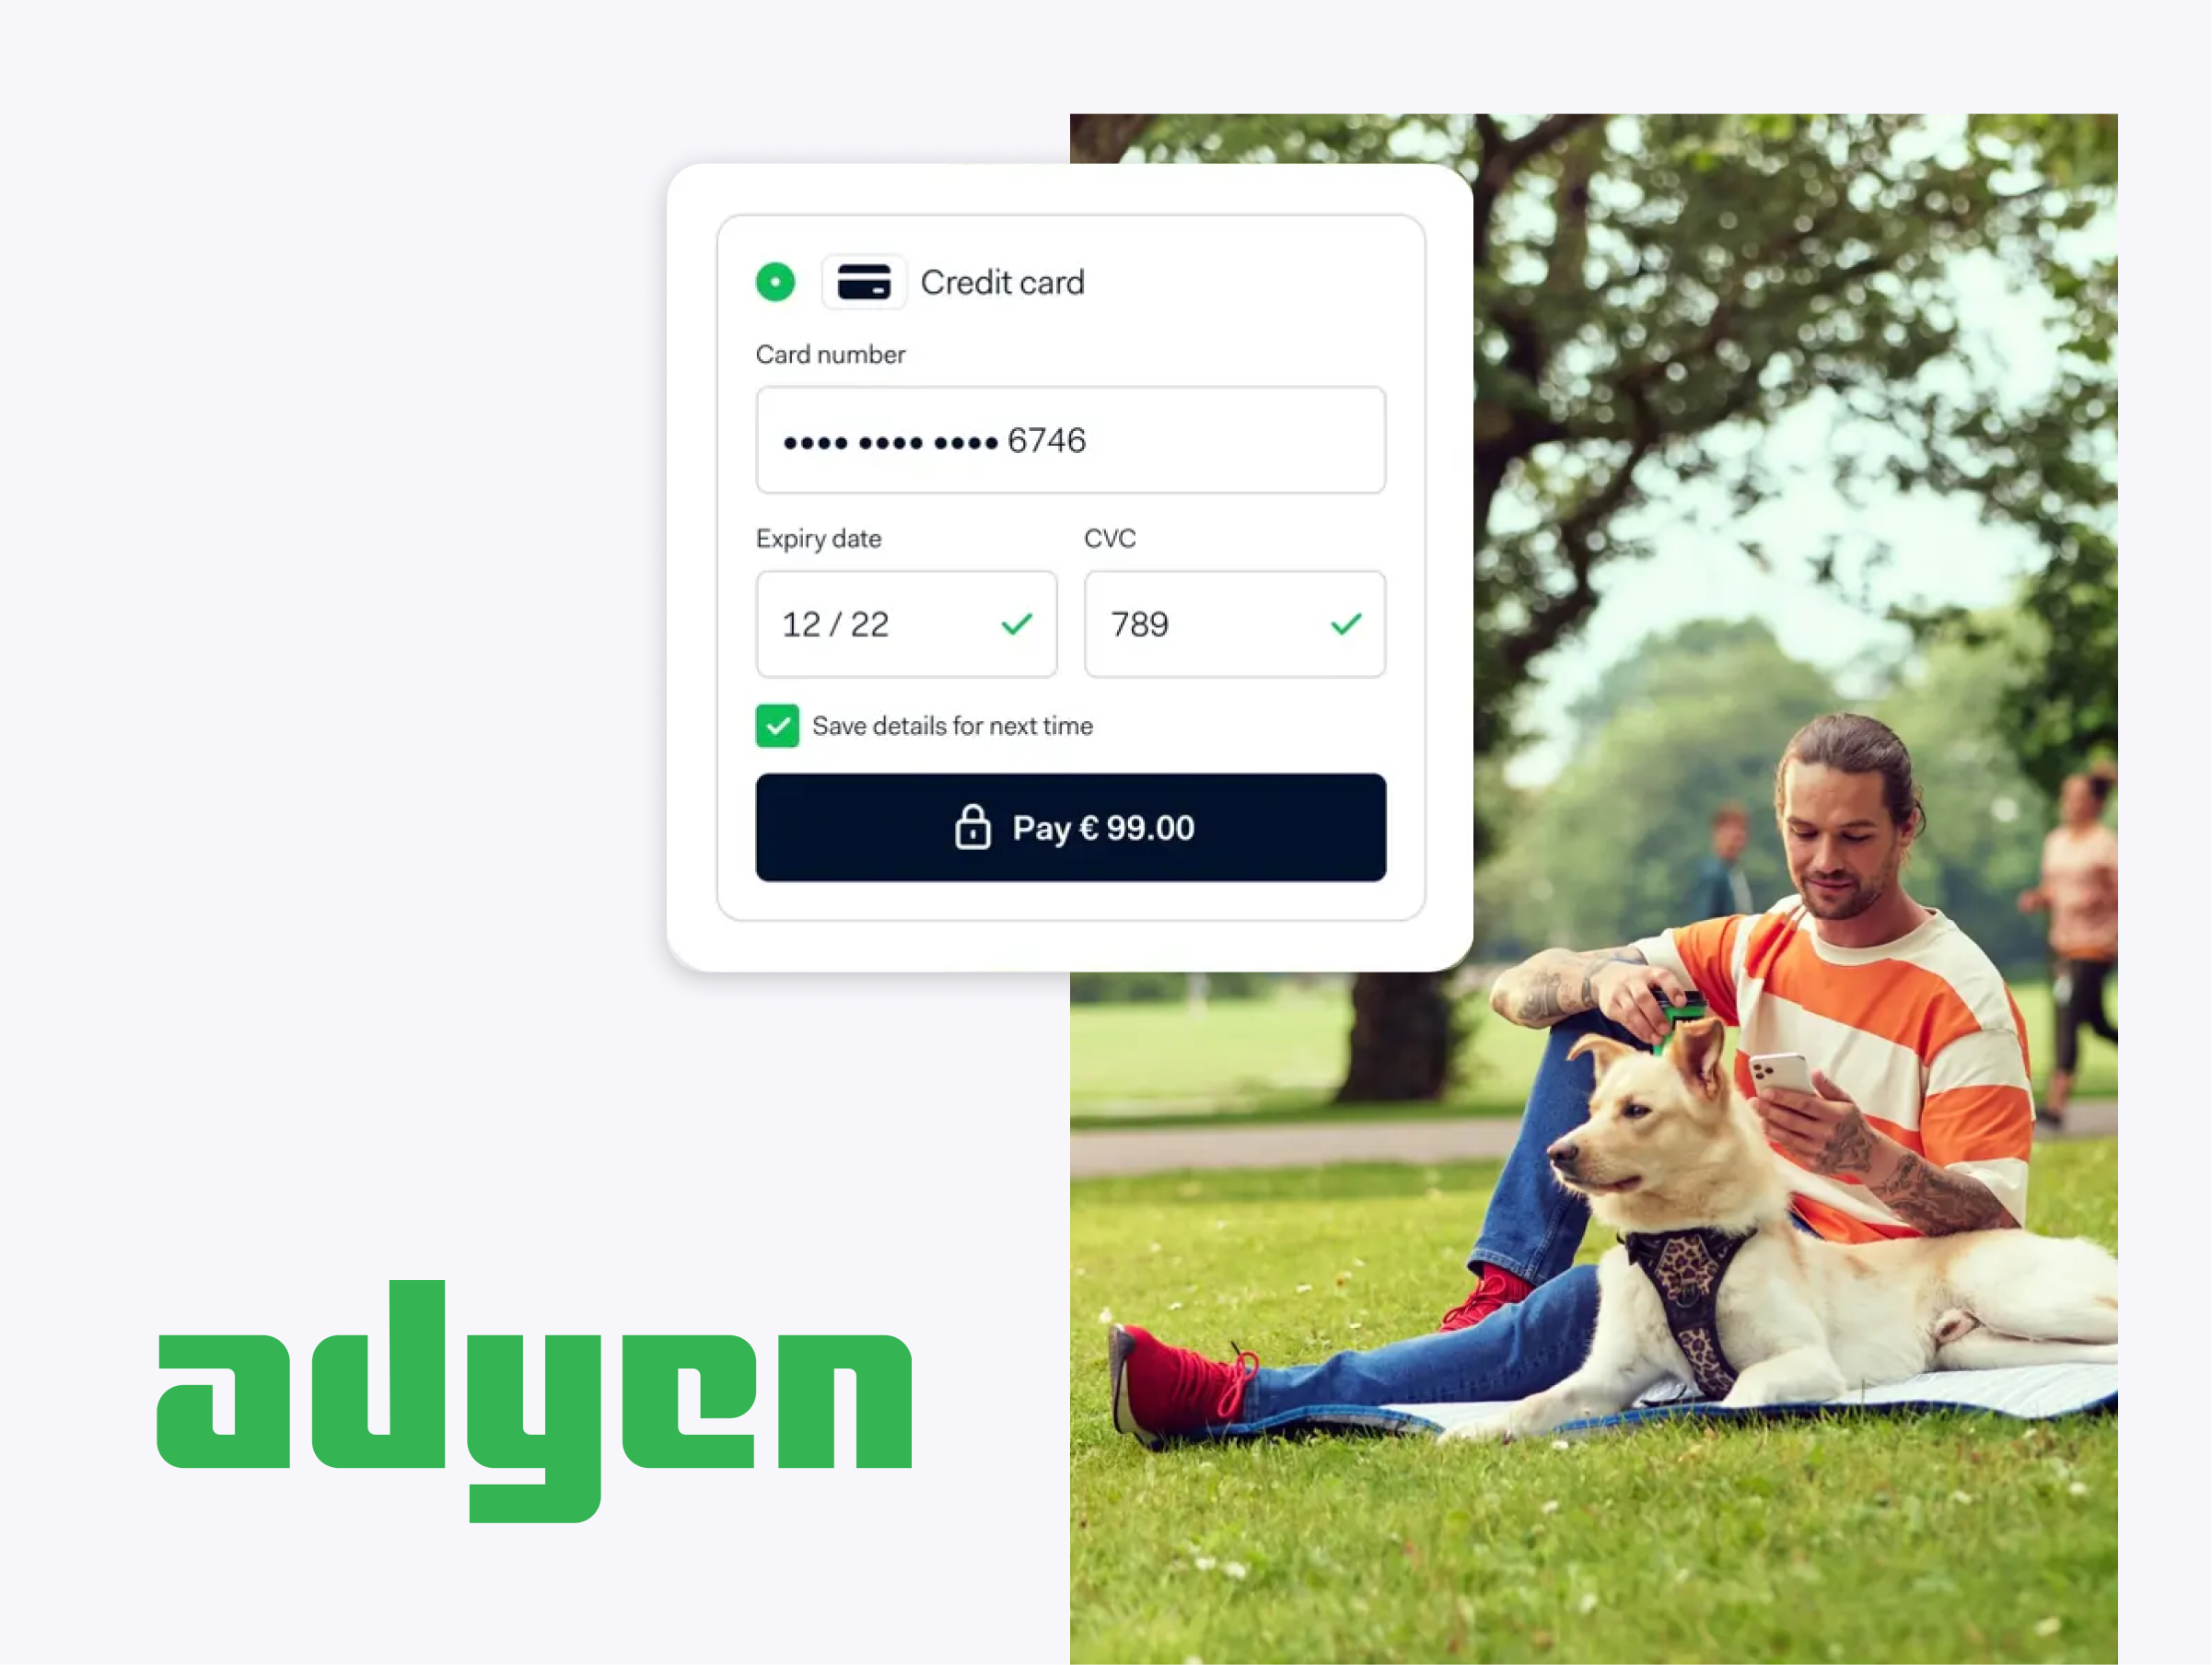 Adyen advertisement featuring a man sitting on a blanket in a park with a dog. The man is wearing a striped orange and white shirt. Above him, a digital payment interface is displayed, showing a credit card entry form with fields for card number, expiry date, and CVC. The 'Pay €99.00' button is highlighted. The Adyen logo is visible at the bottom left of the image.